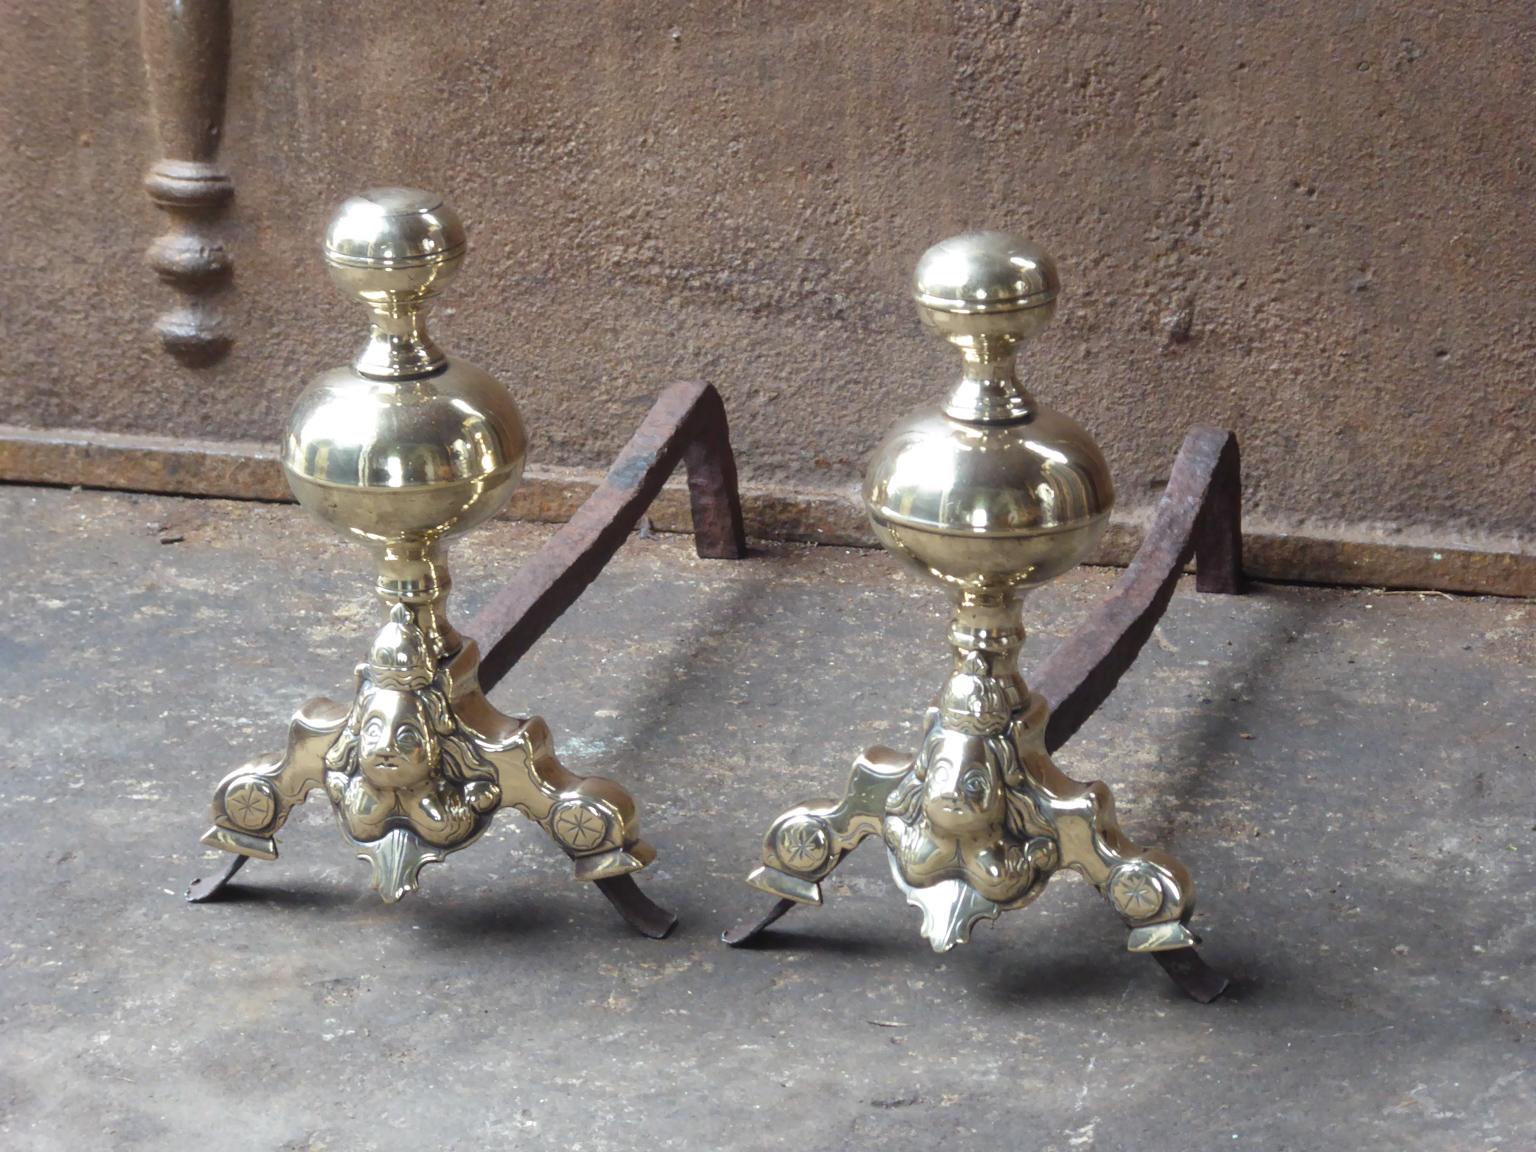 Forged French Louis XIV Period Andirons or Firedogs, 17th Century